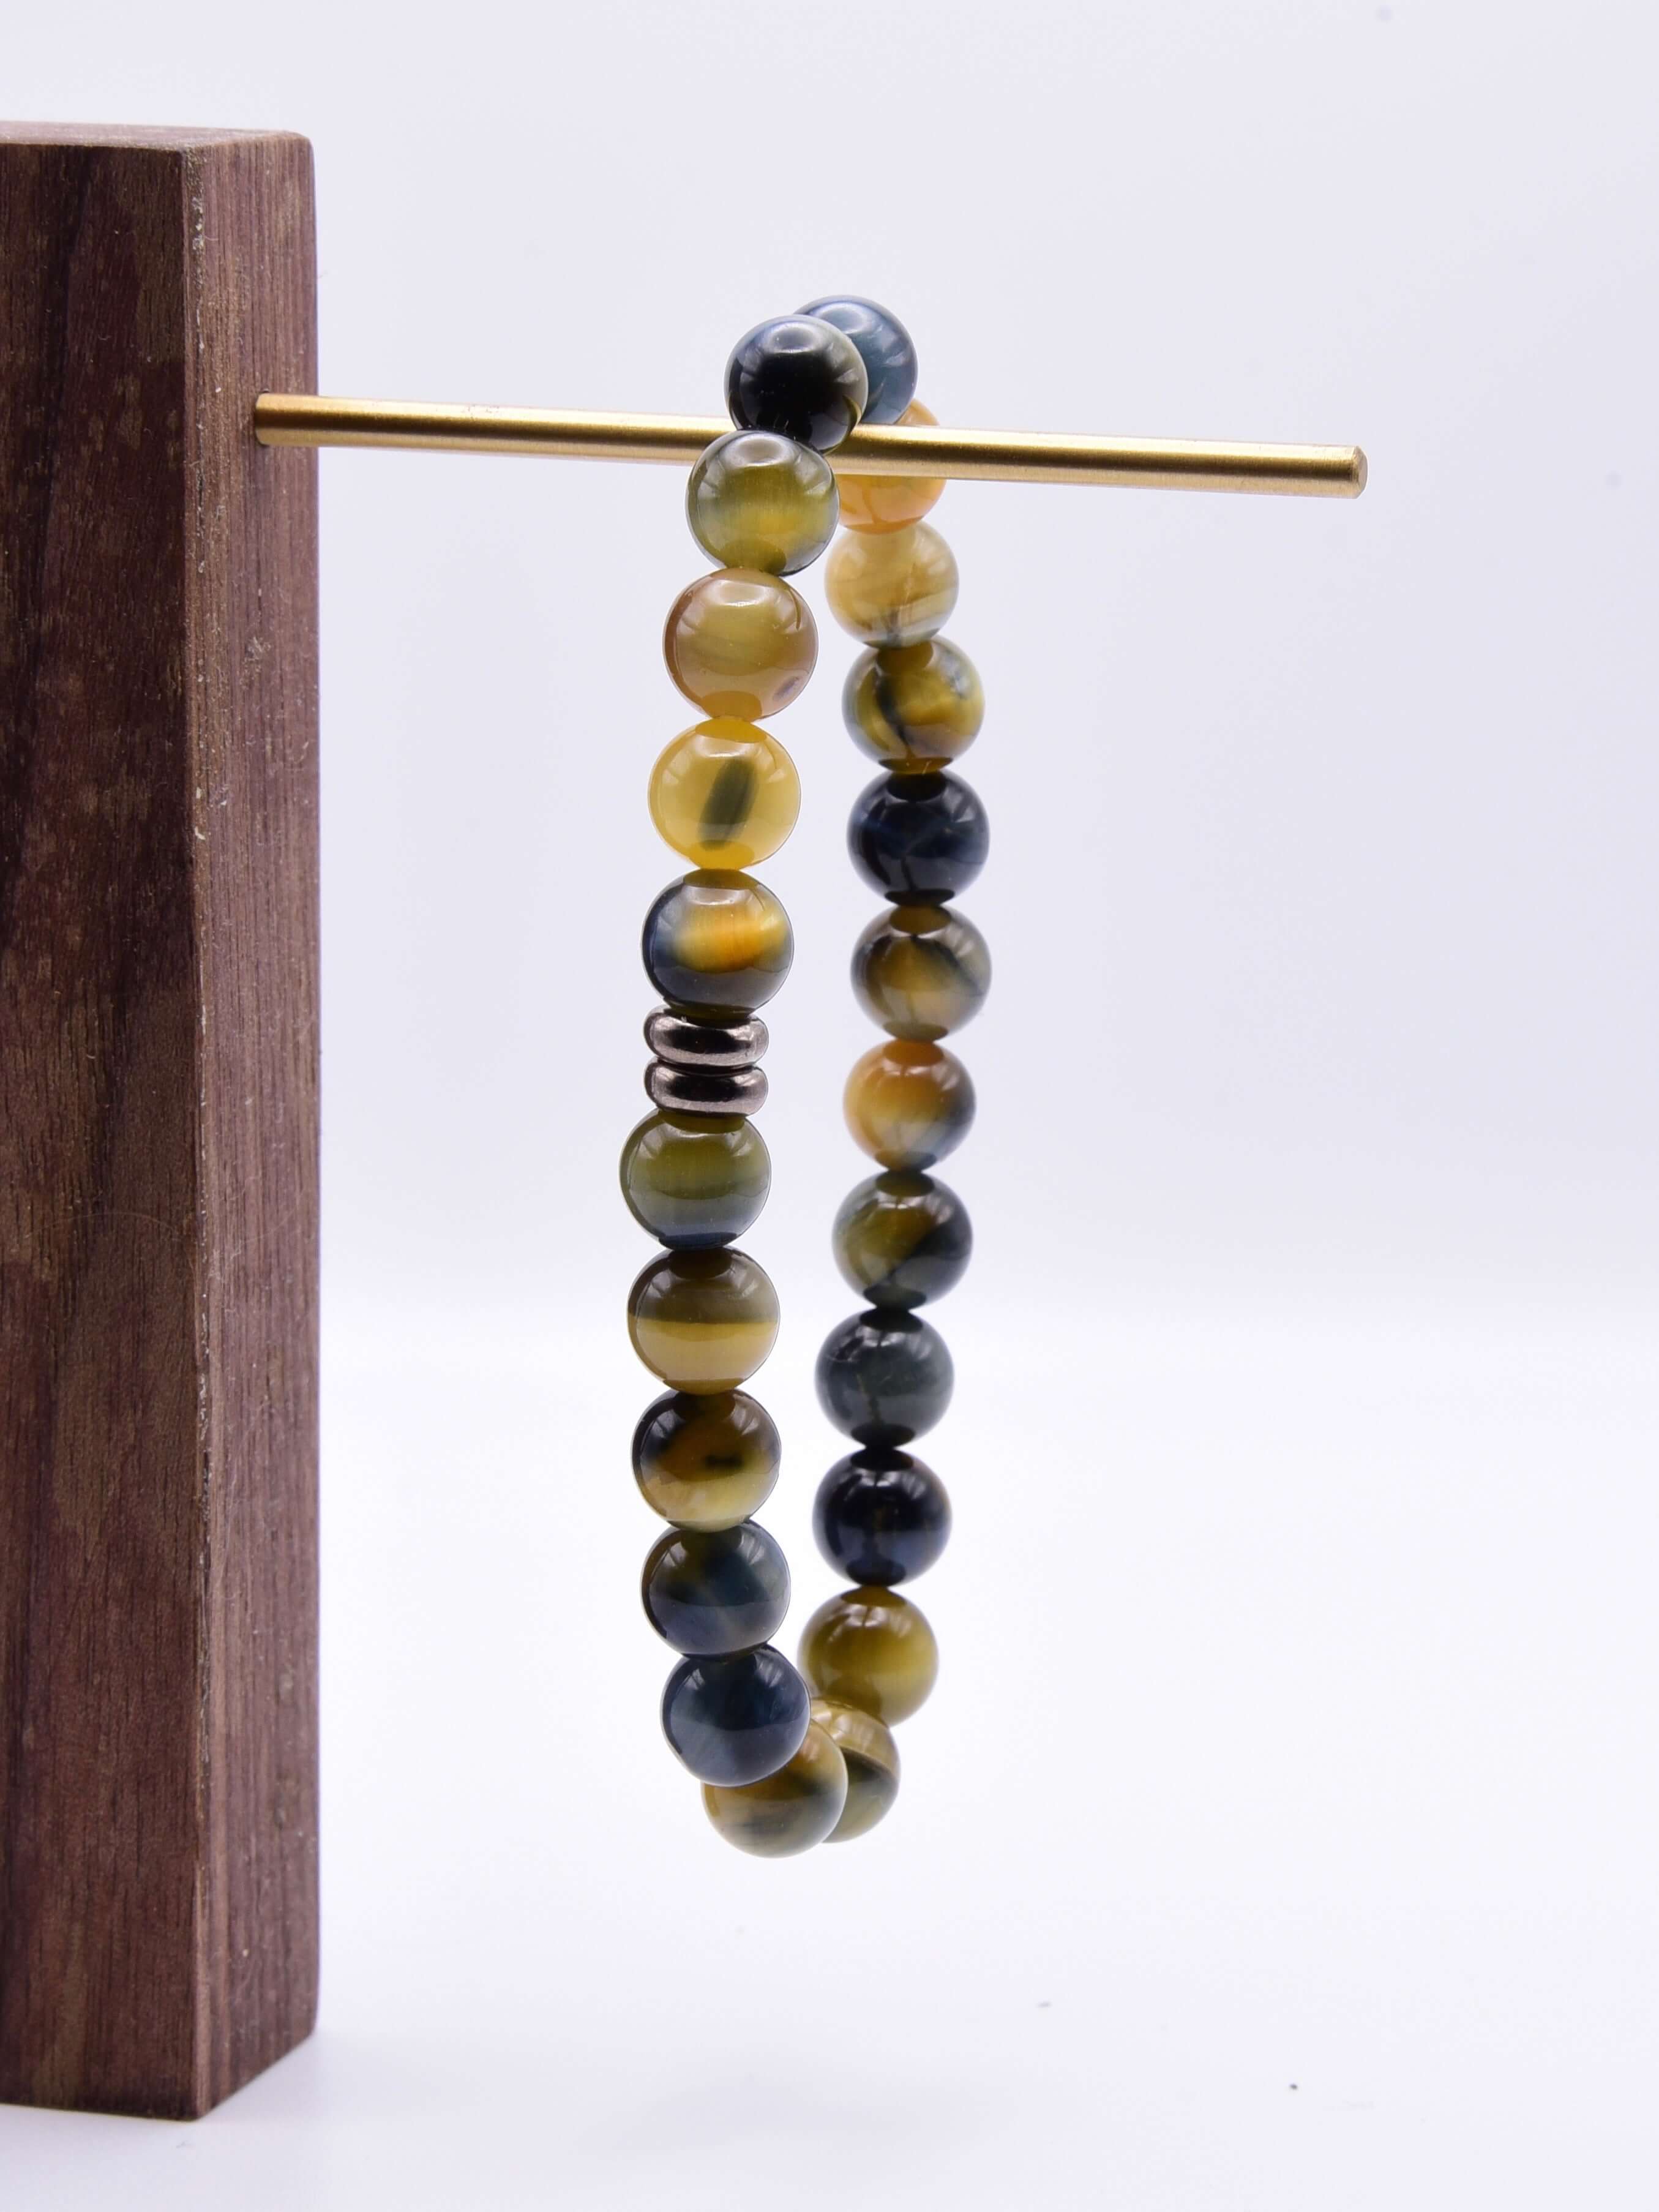 Blue and Blonde Tiger Eye Bead Bracelet This bracelet is made with high-quality Blue and Blonde Tiger Eye stones which bring confidence and optimism to the wearer. Zodiac Signs: Leo and Capricorn. Chakras: Root and Solar Plexus. Handmade with authentic cr